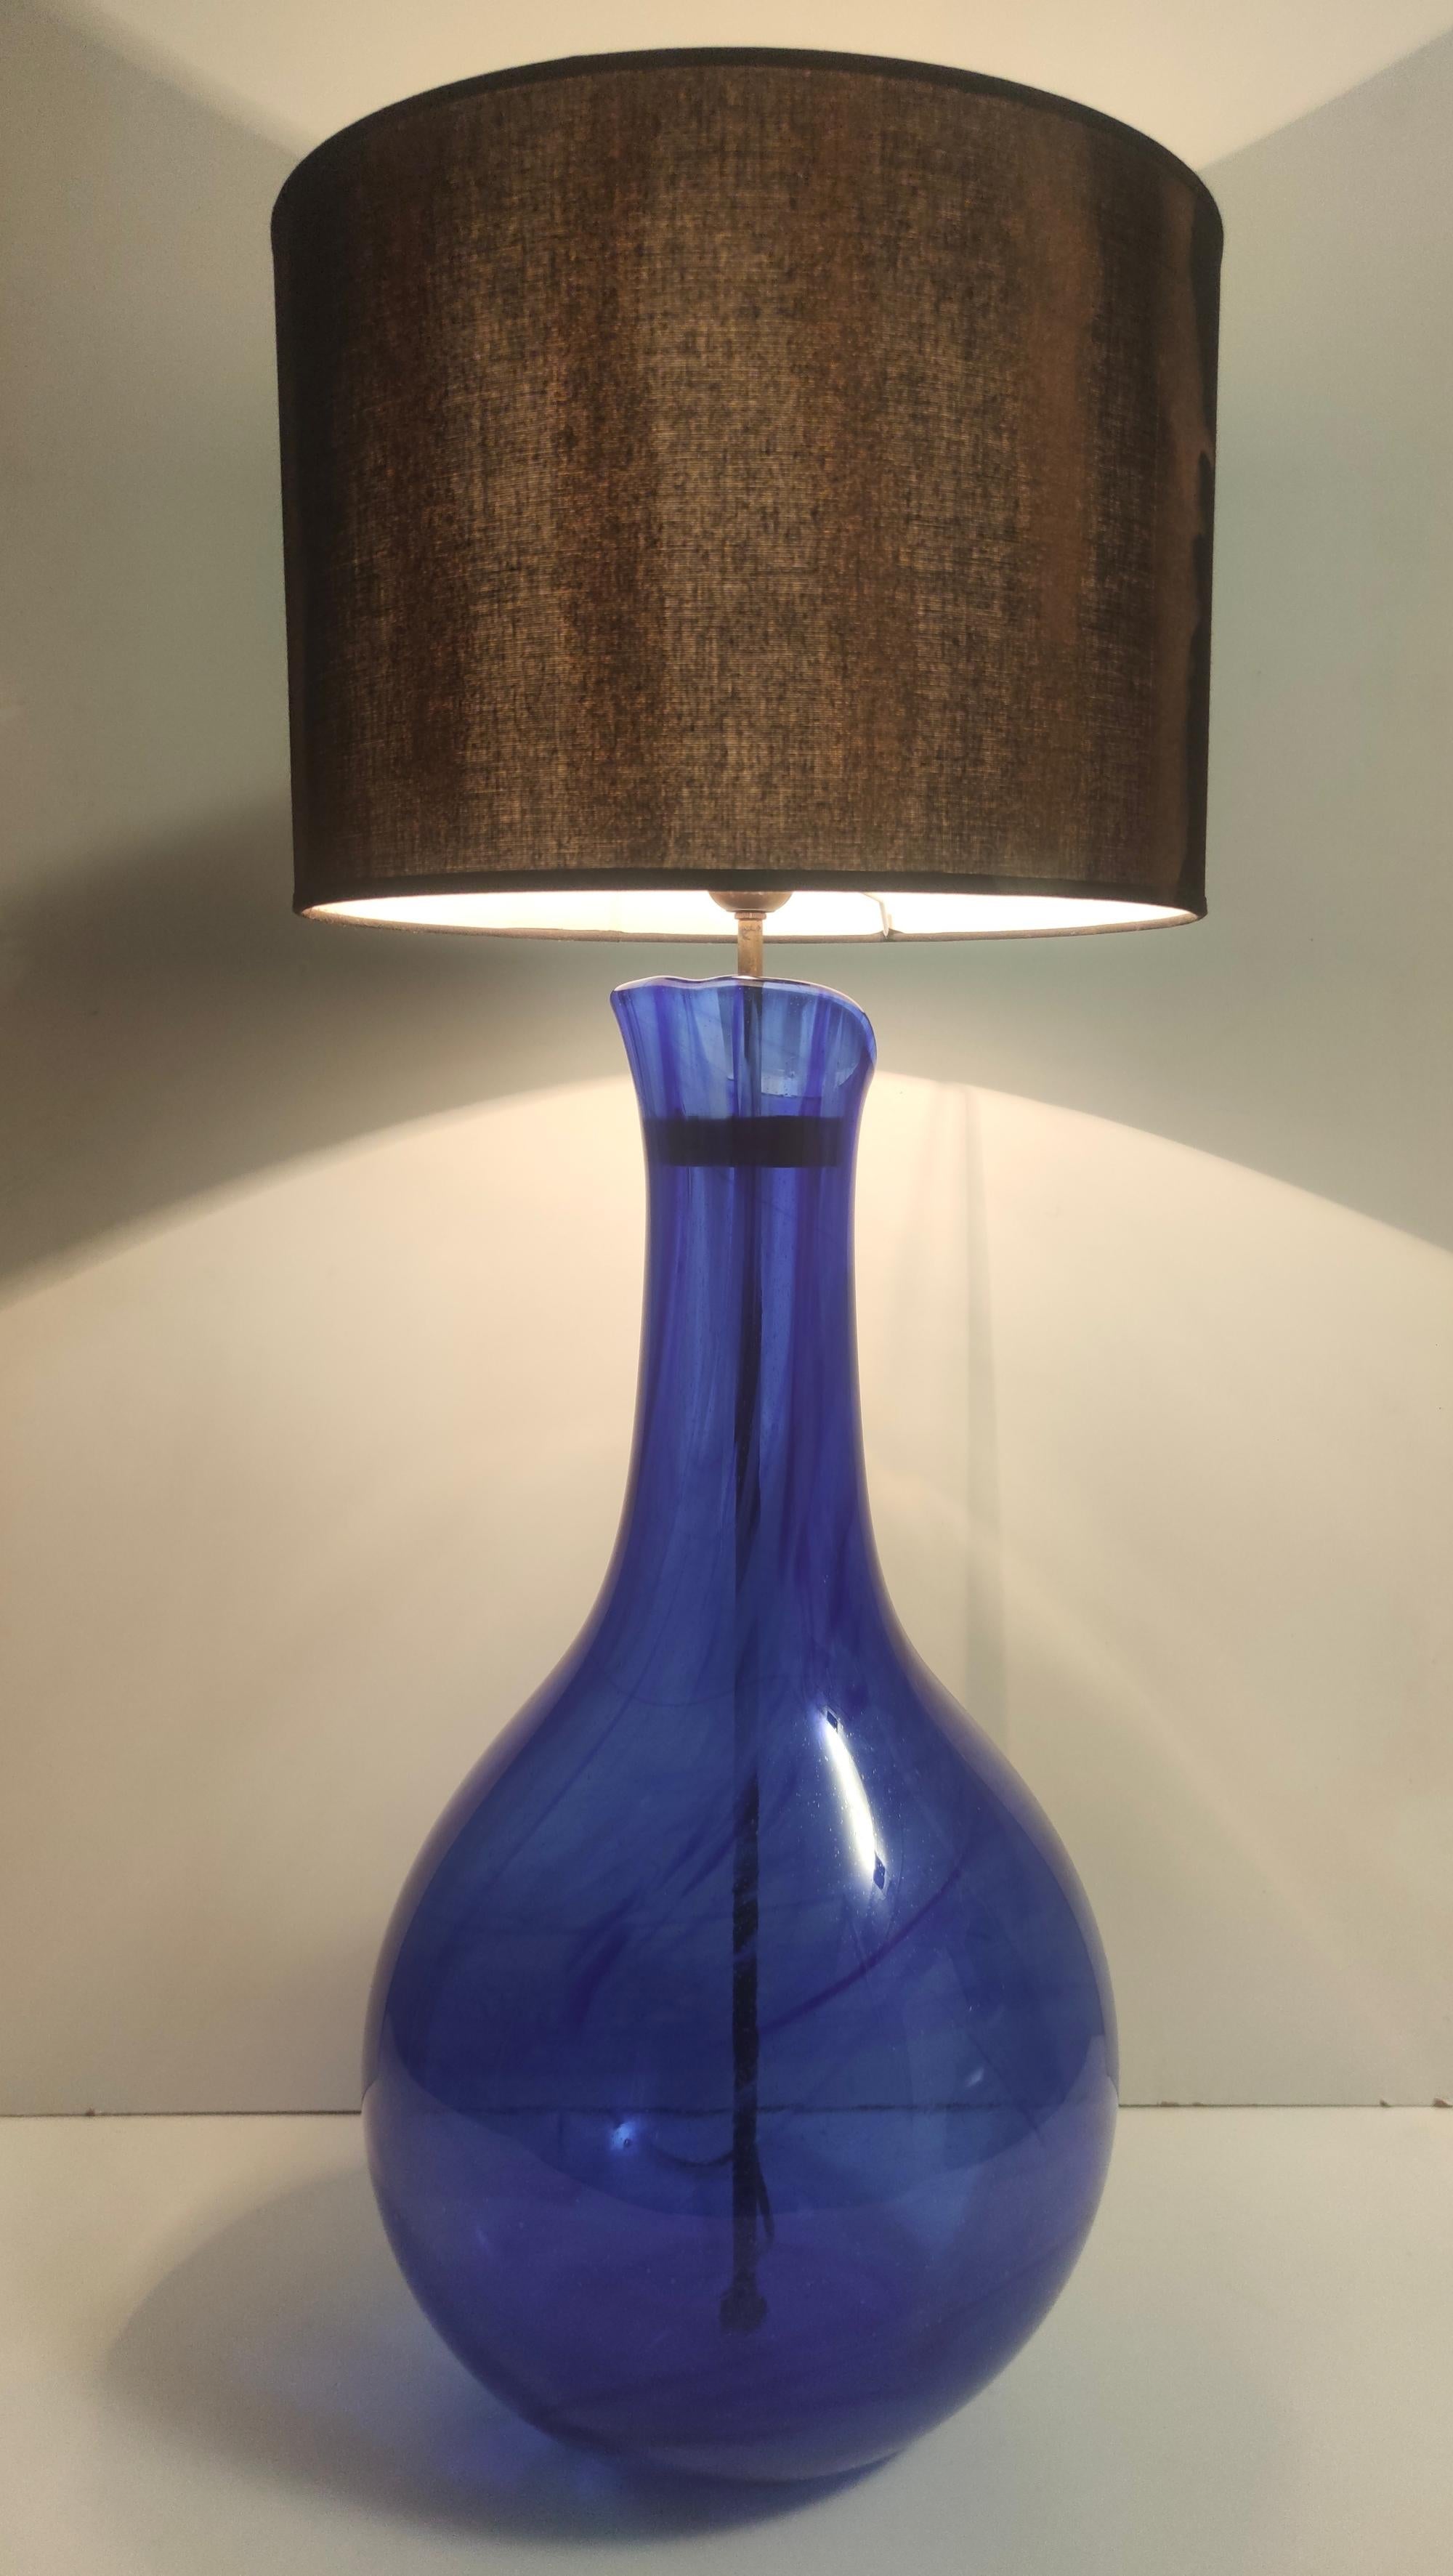 Made in Italy, 1960s - 1970s.
The lamp features a blue Murano glass base, that has bubbles and pleasant transparencies and veins due to the handcraft process. 
The wiring has been renewed and is compatible with the US.
It might show slight traces of